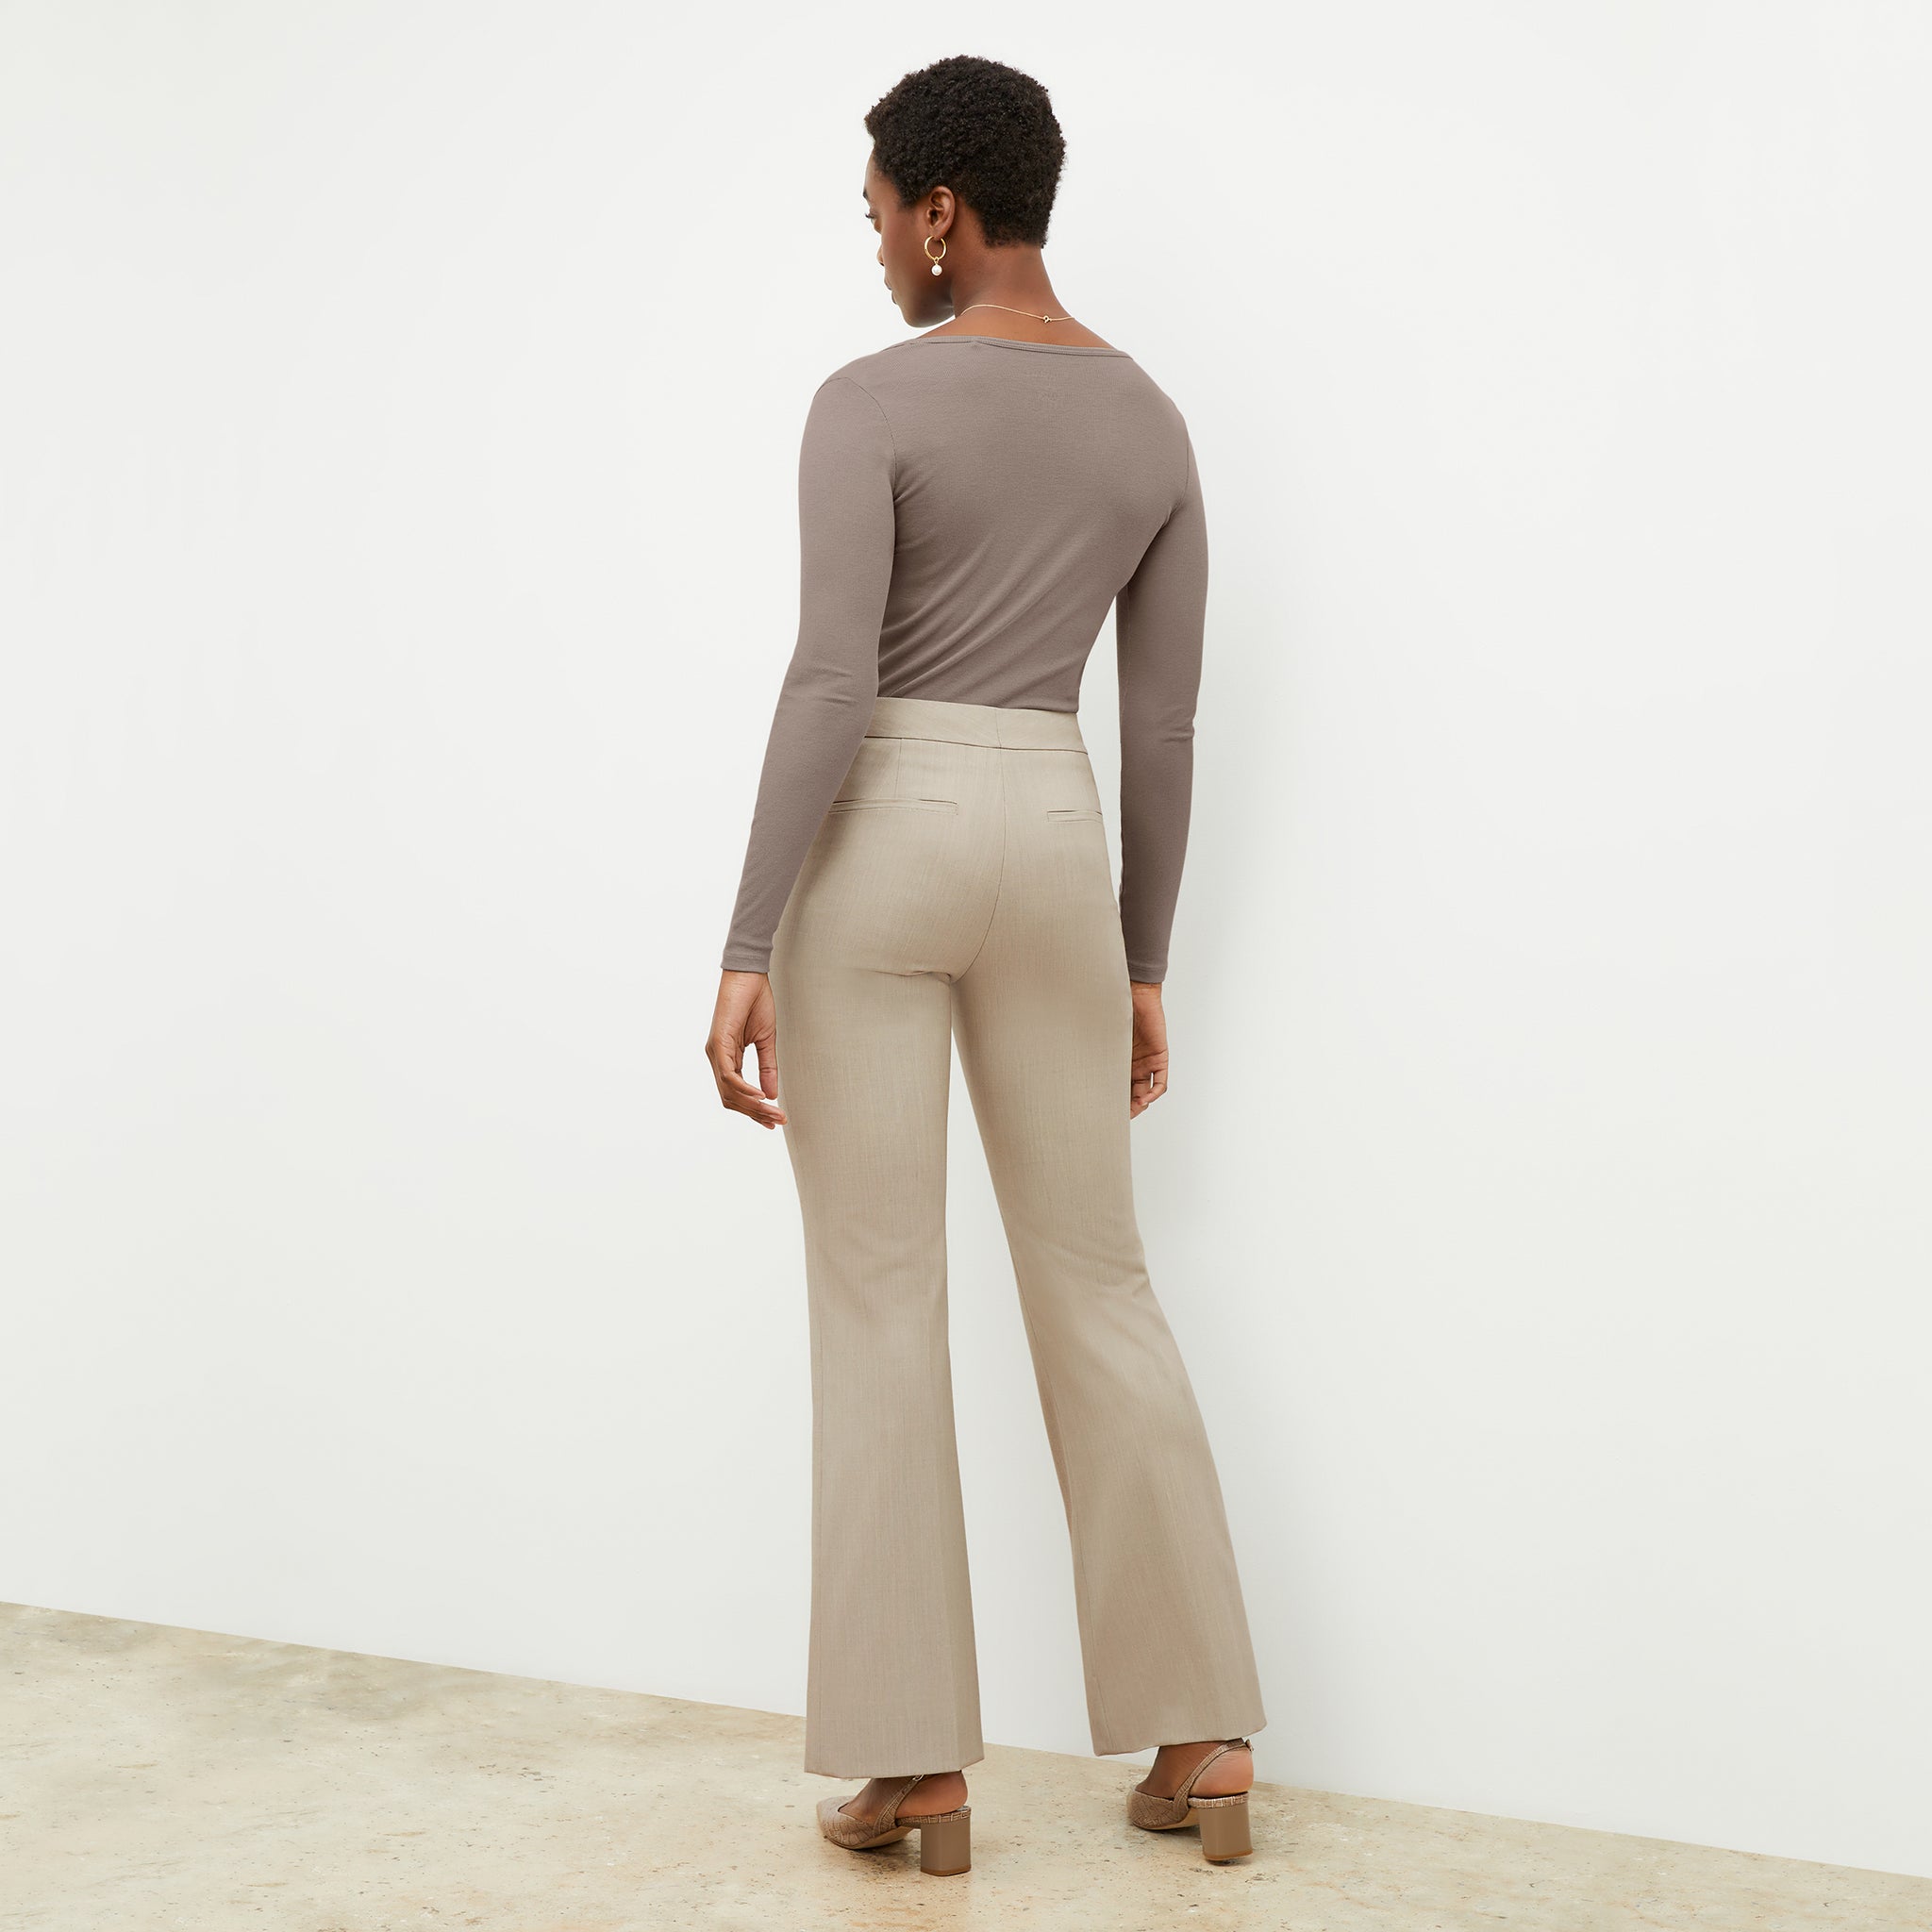 Back image of a woman wearing the Horton Pant in Natural Melange